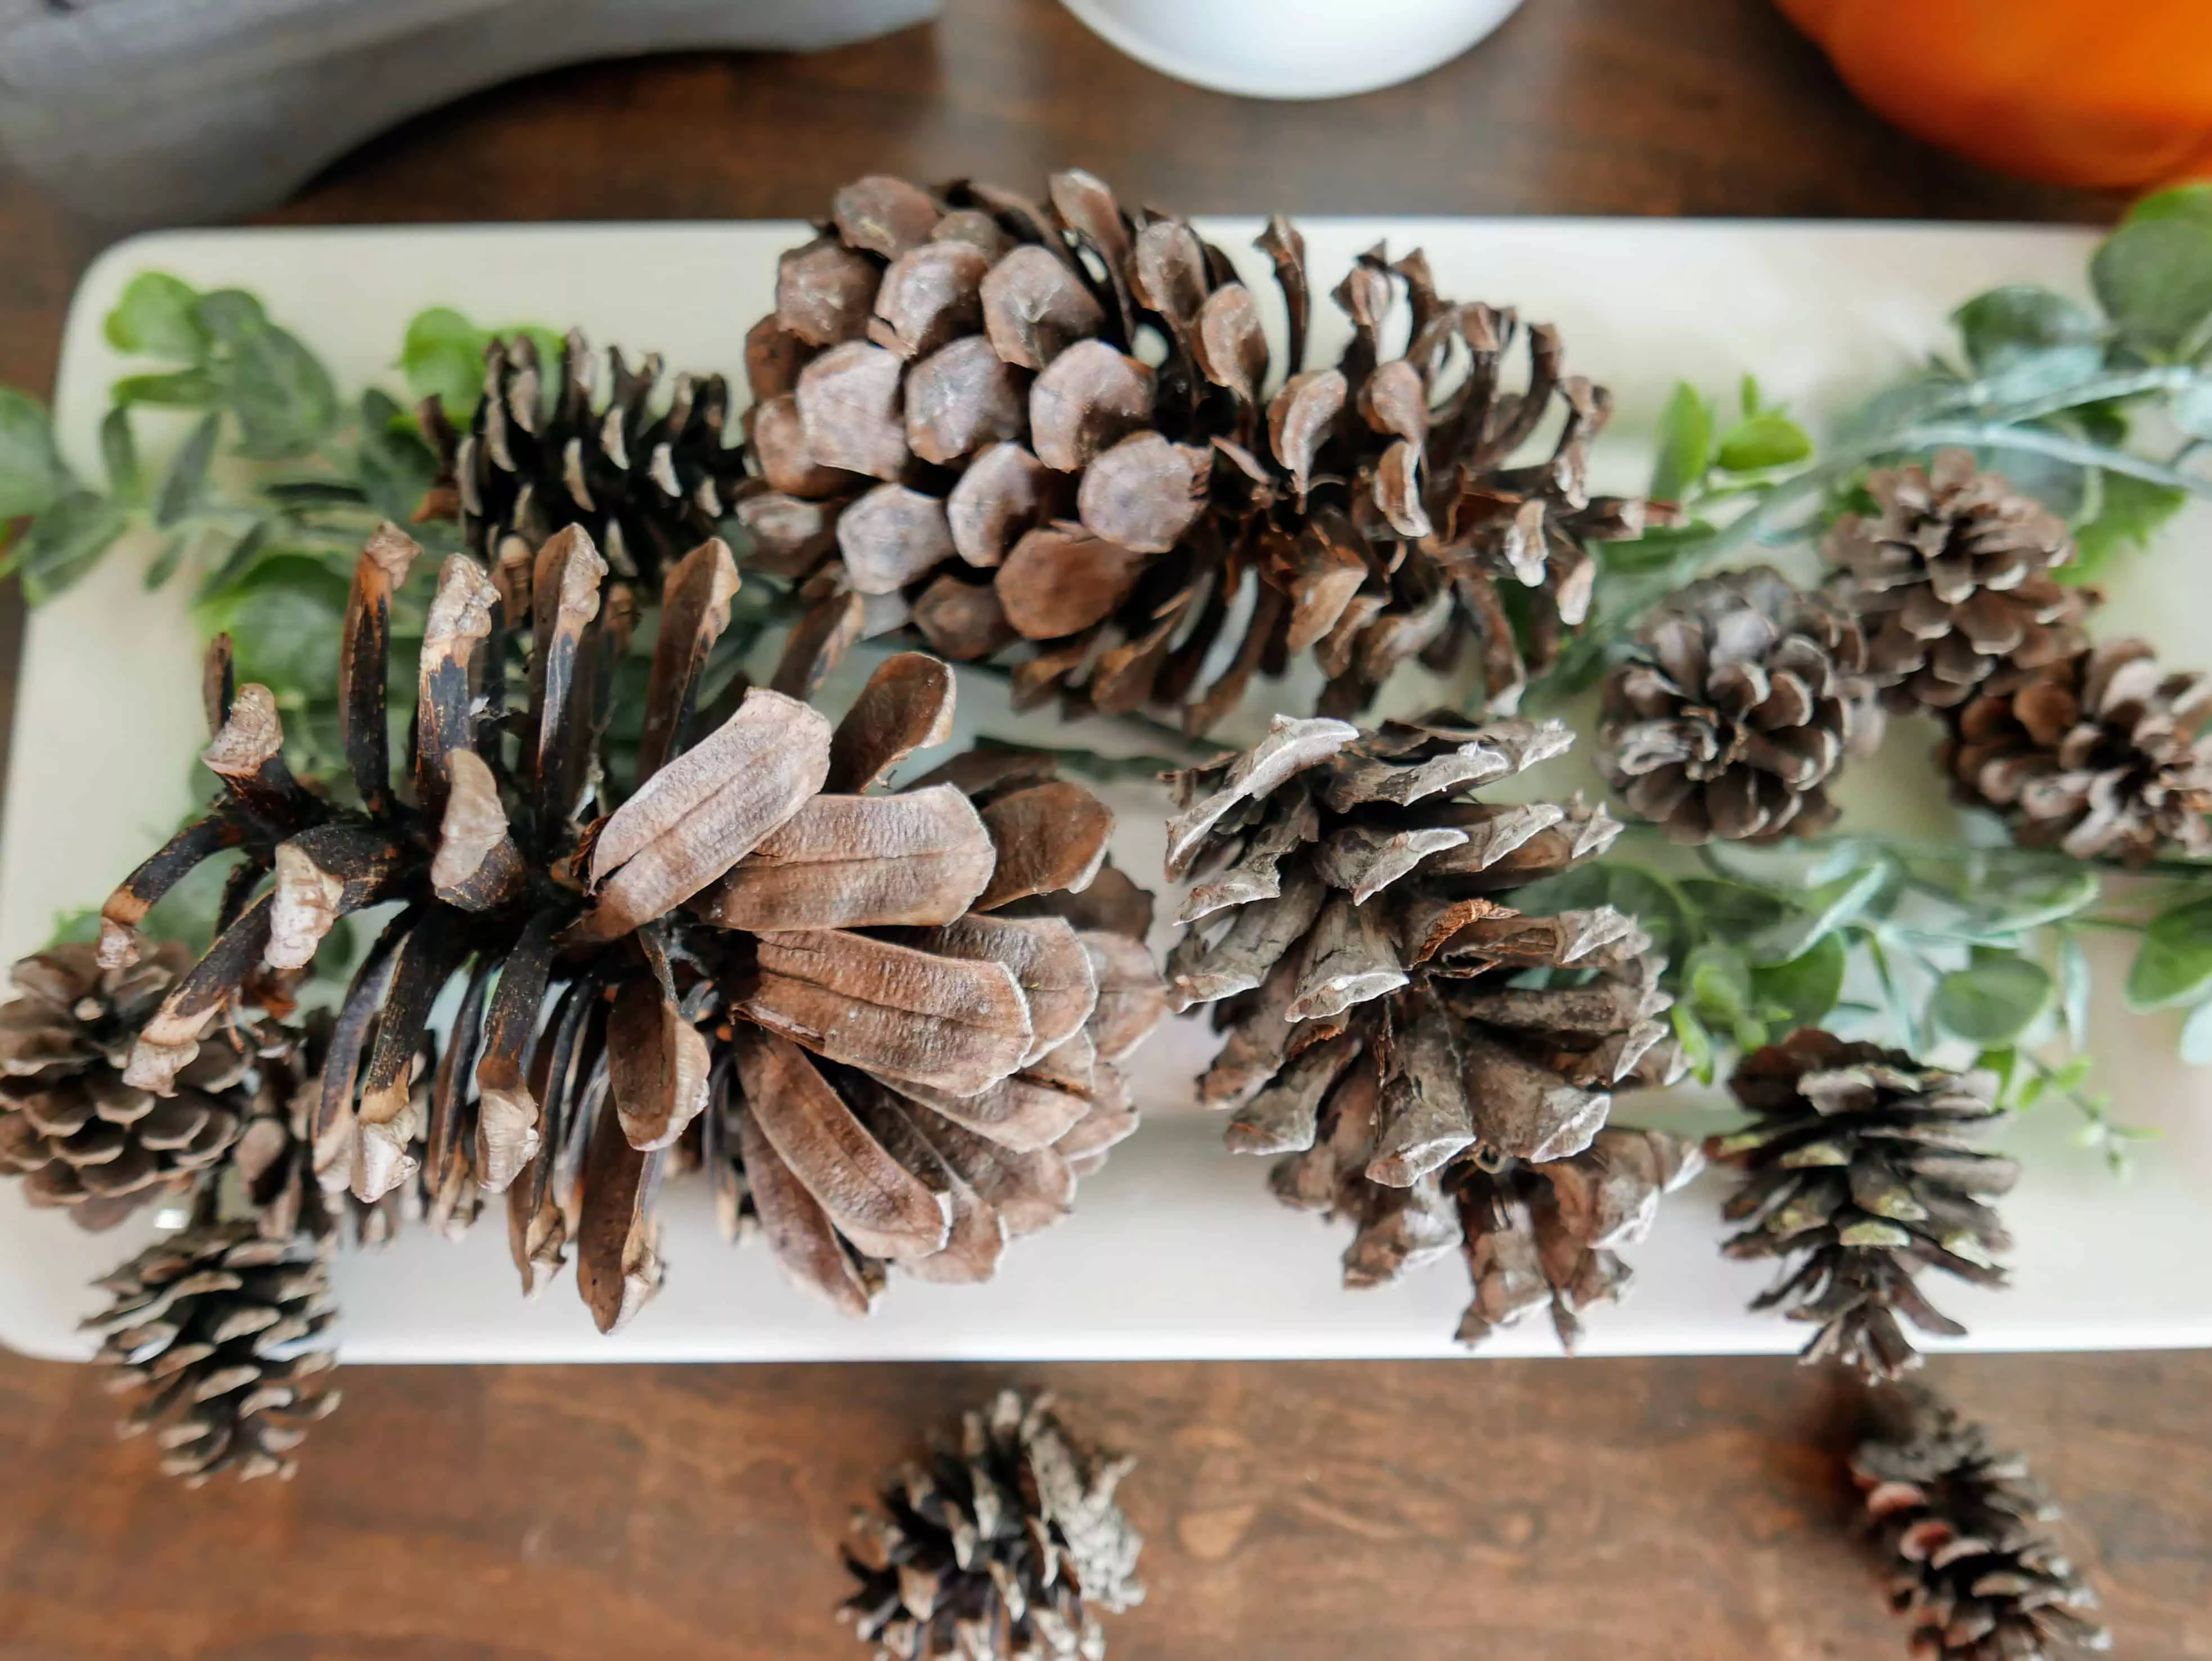 scented pinecones on a tray with greenery